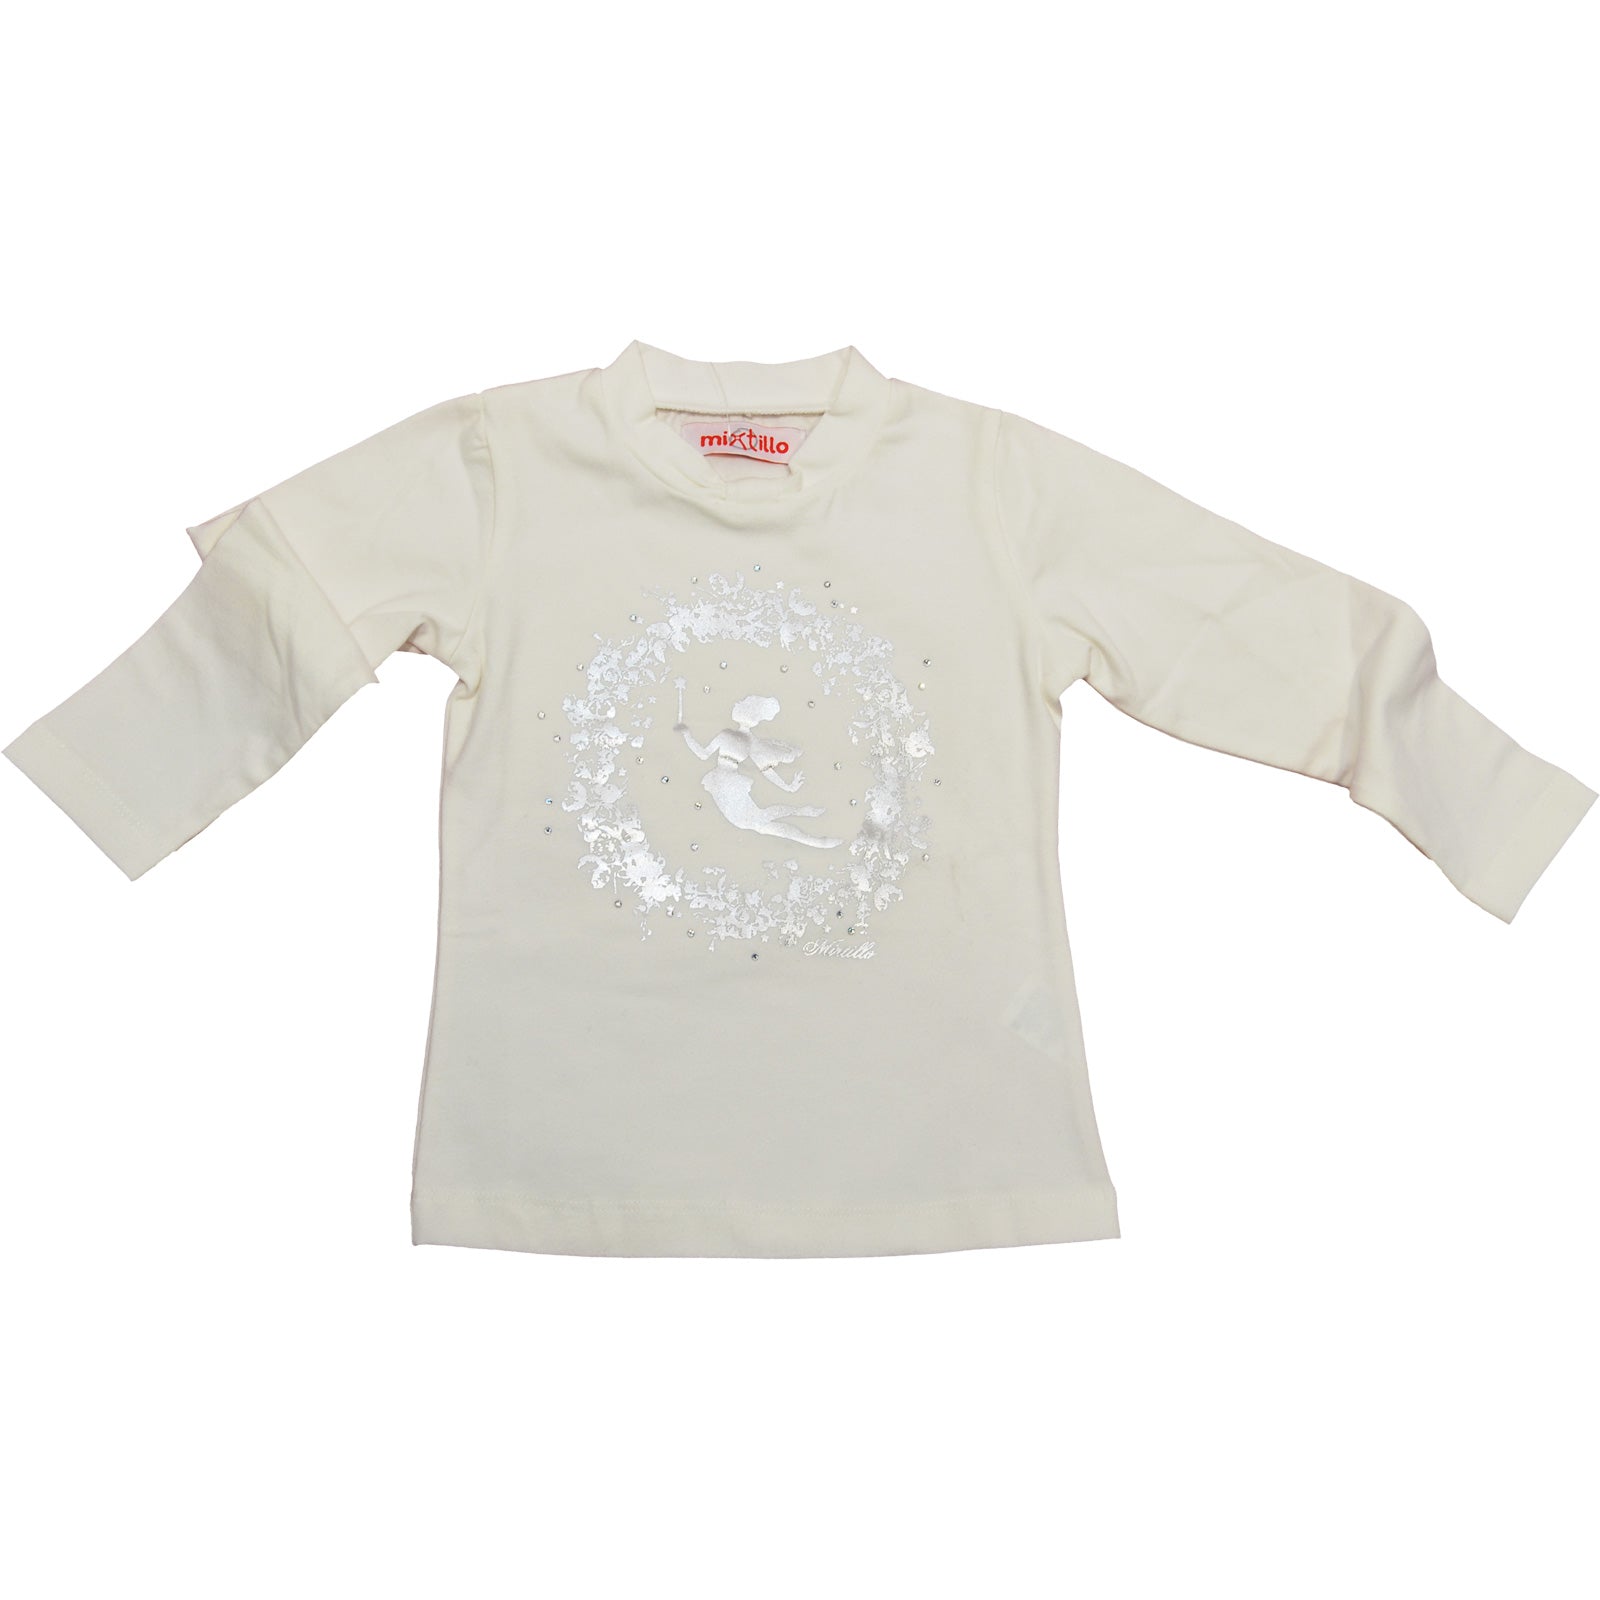 
  T-shirt from the girls' clothing line Mirtillo with bow collar, print and rhinestone applicati...